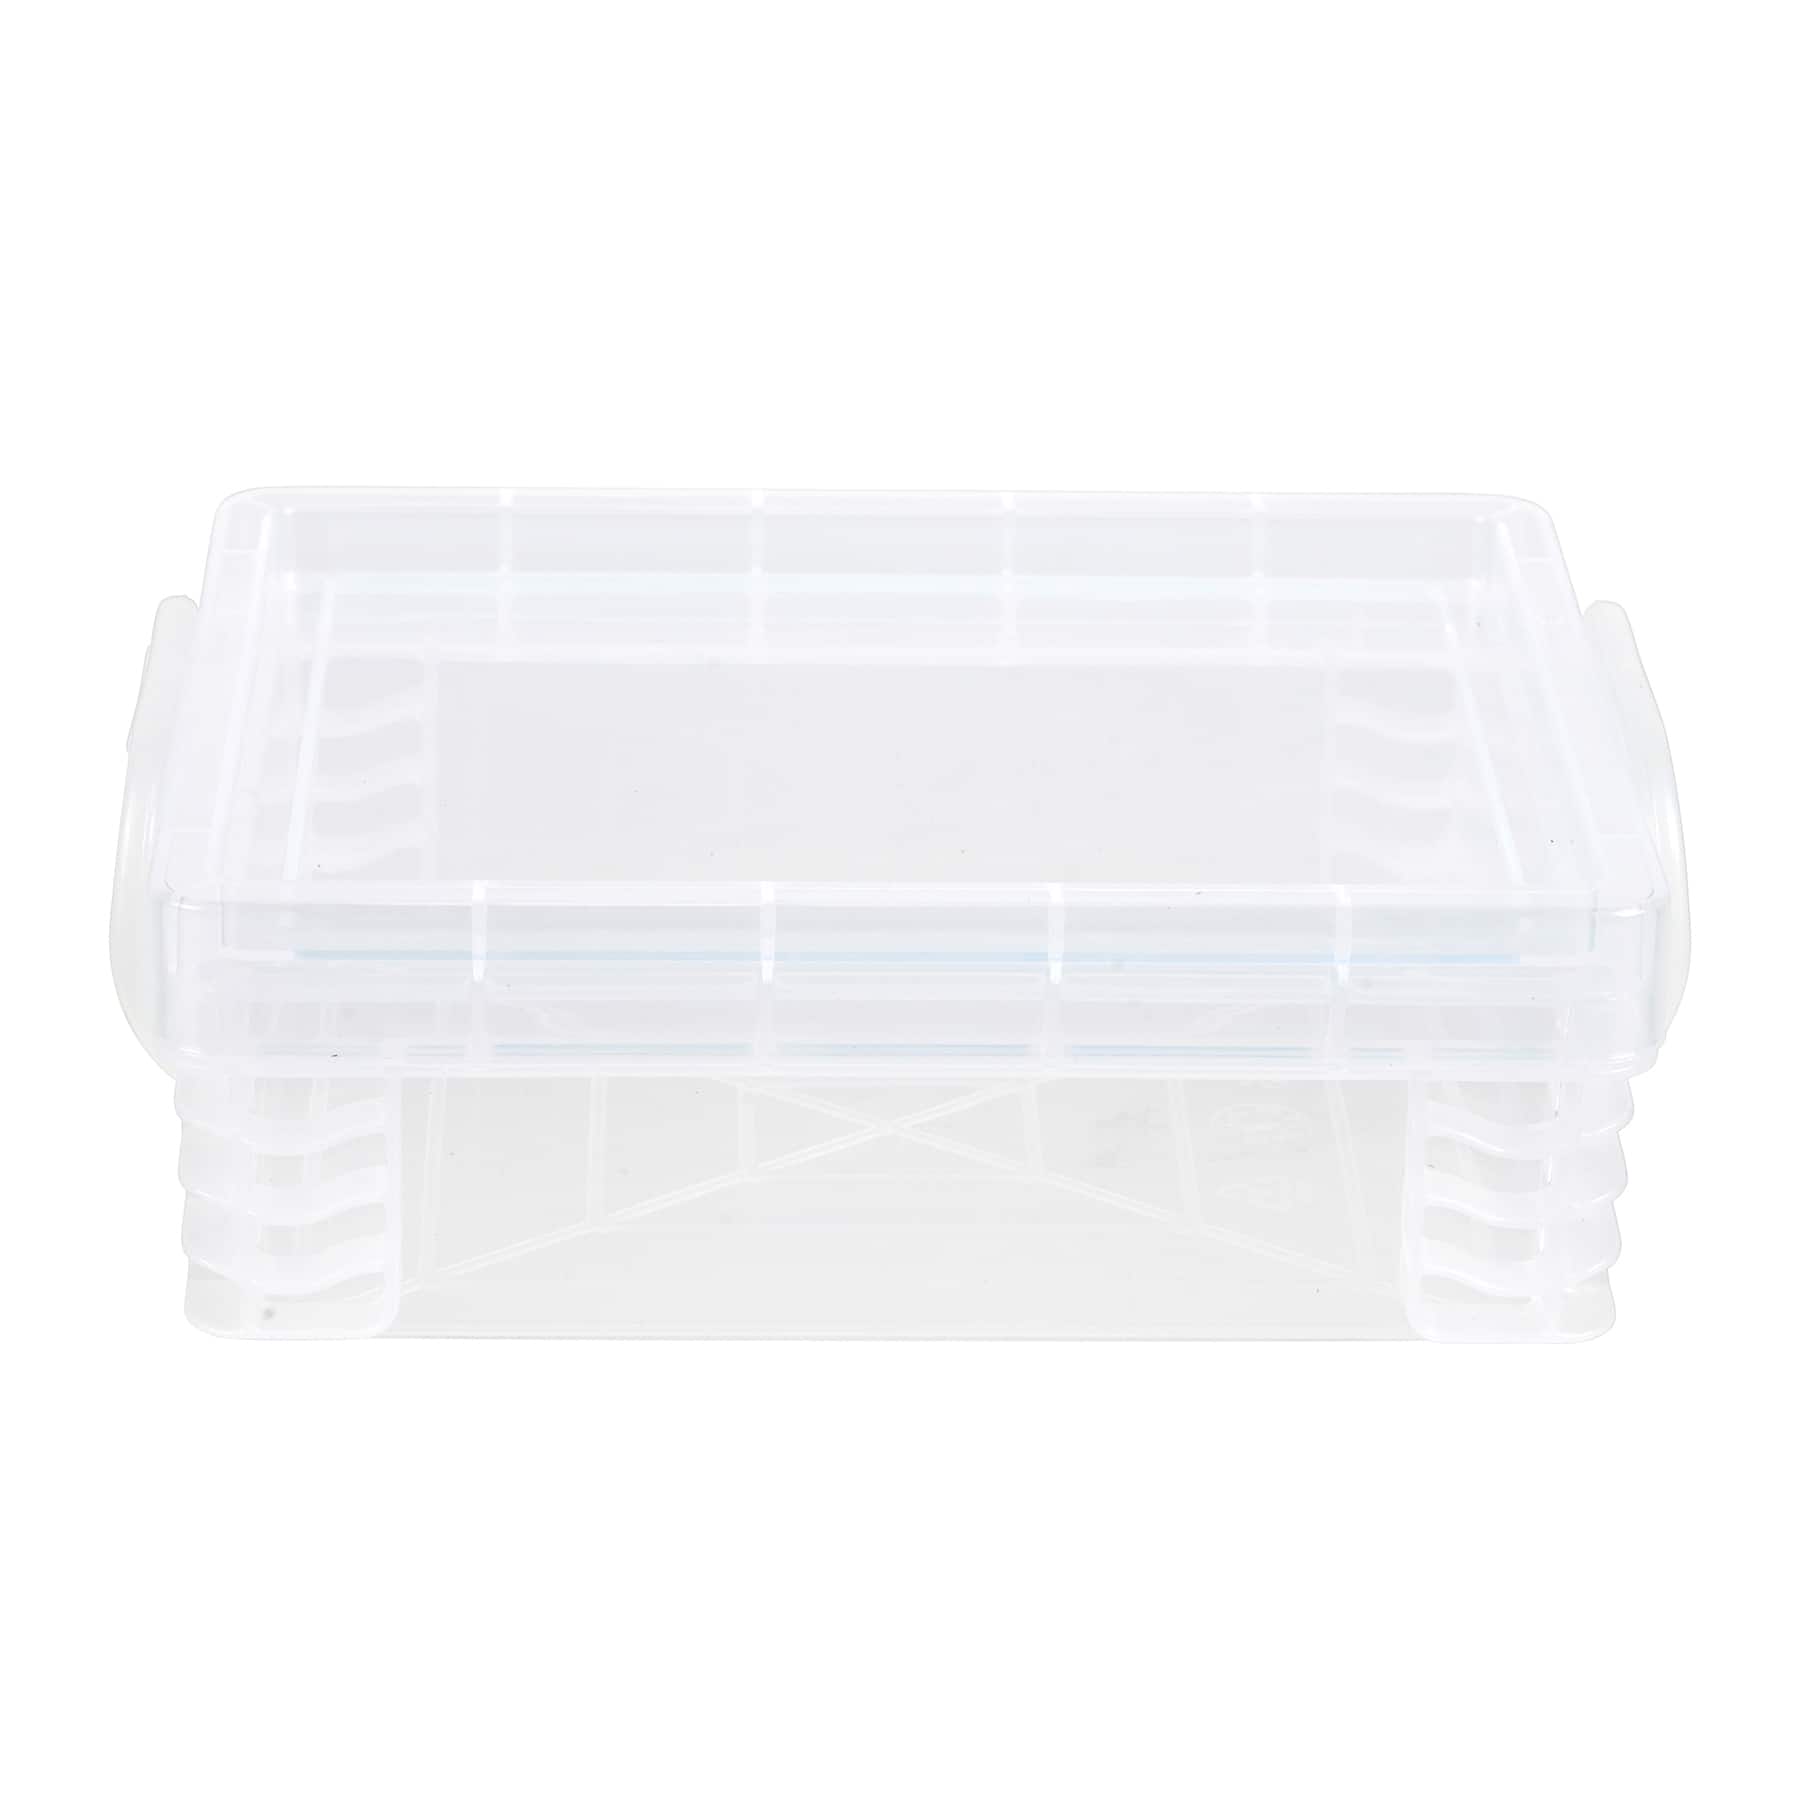 CHILDHOOD 2 Pack of Clear Plastic Clip Box Crafts & Office Supplies Crayon Box Storage Organizer Container Box 6.5 x 4.5 Inches Small Modular Supply Case for Crayons 